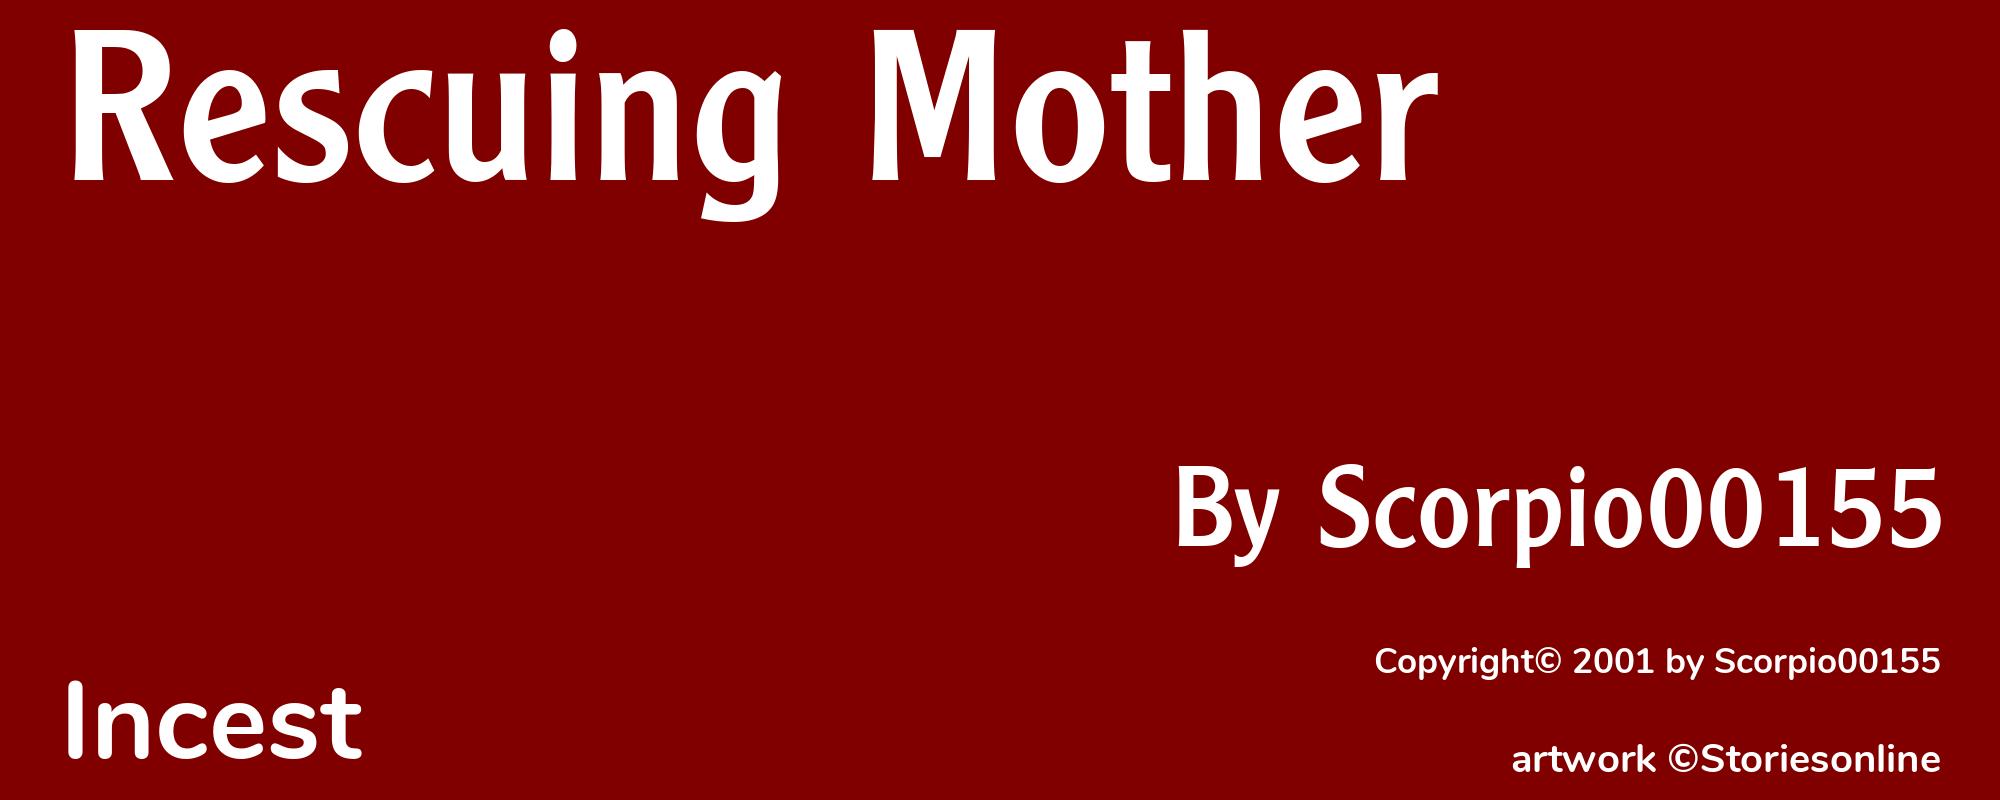 Rescuing Mother - Cover